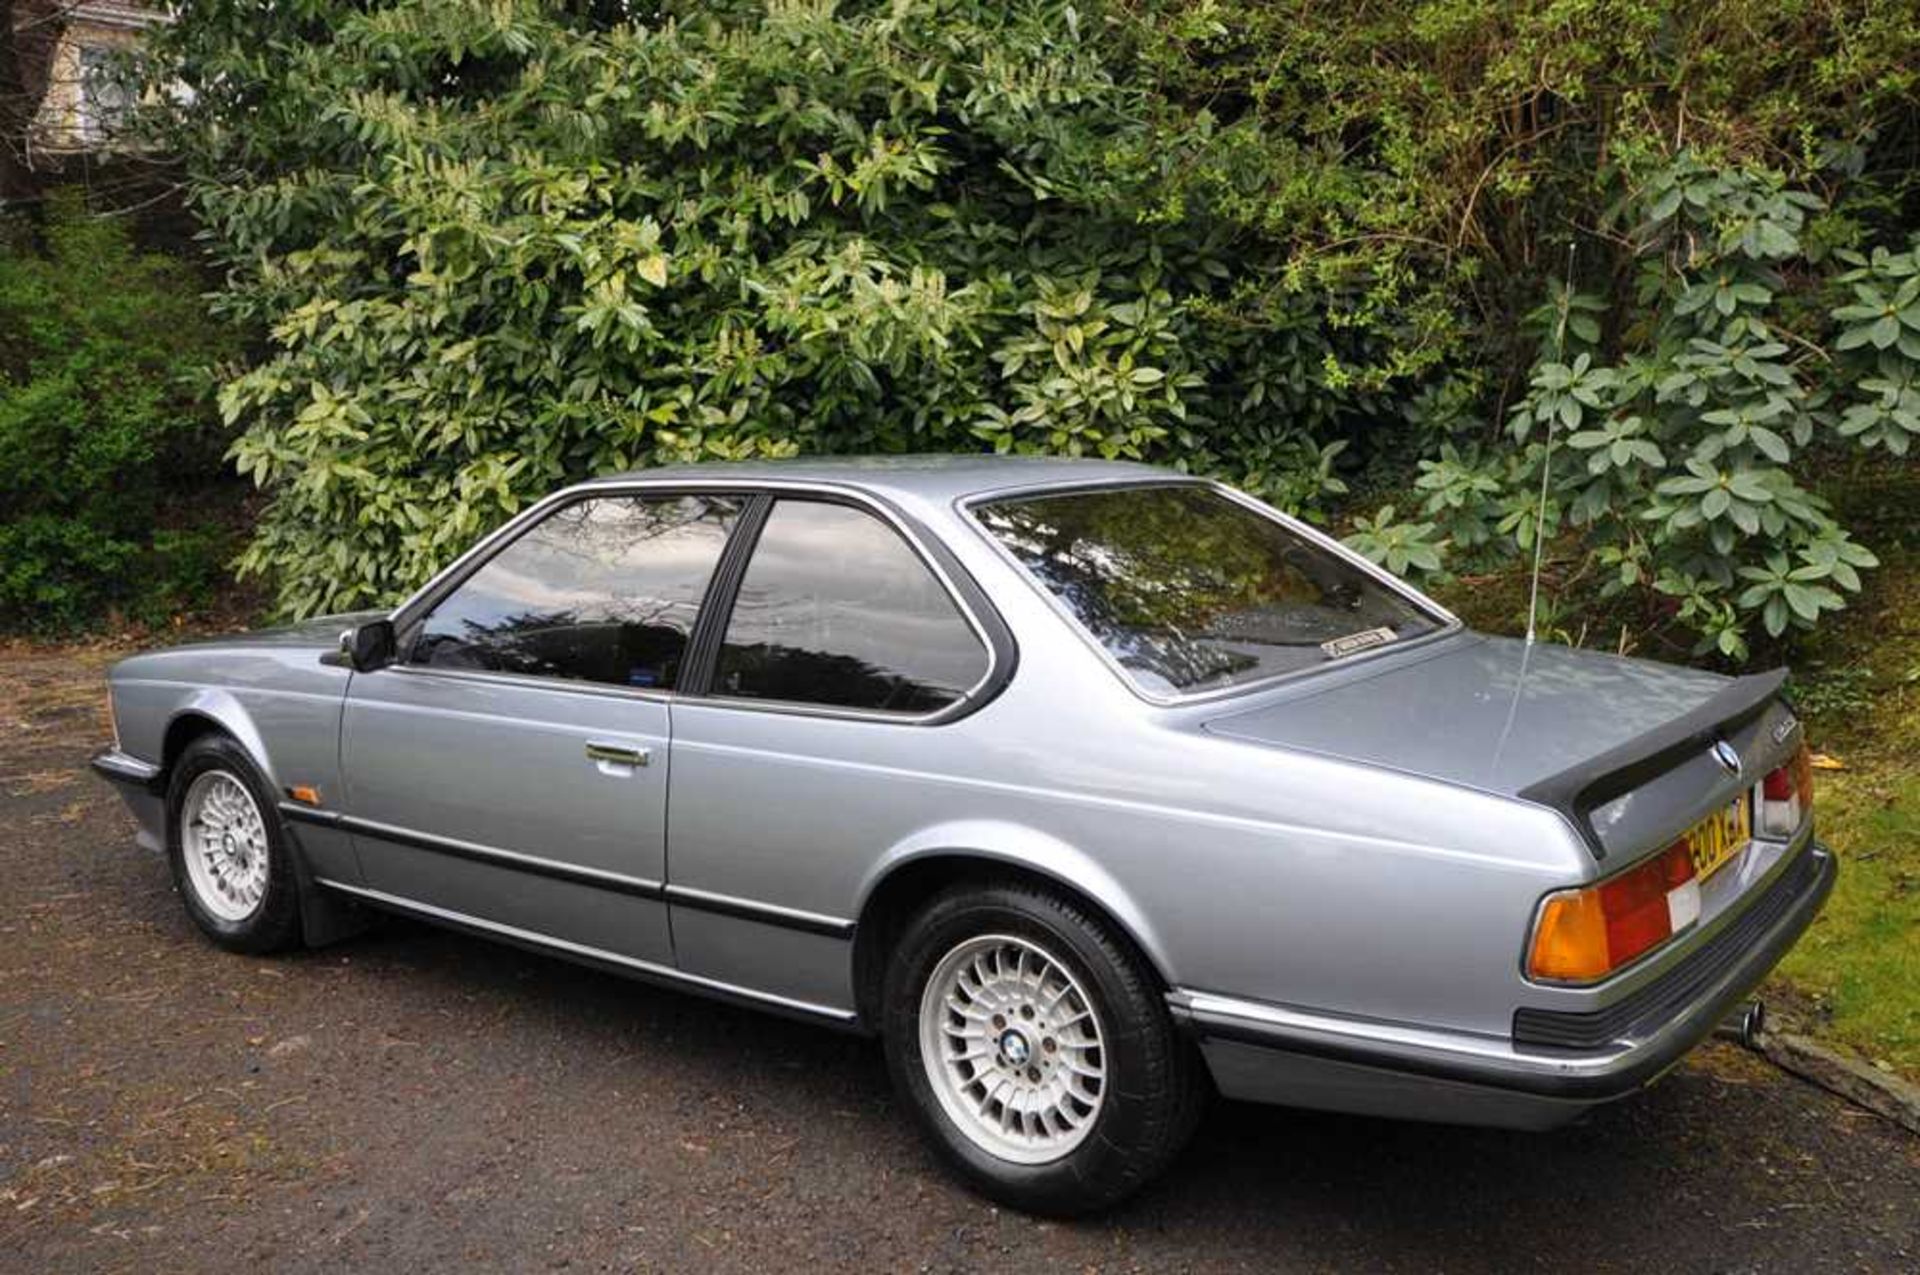 1985 BMW 635CSi Only 54,000 miles and One Owner From New - Image 3 of 43